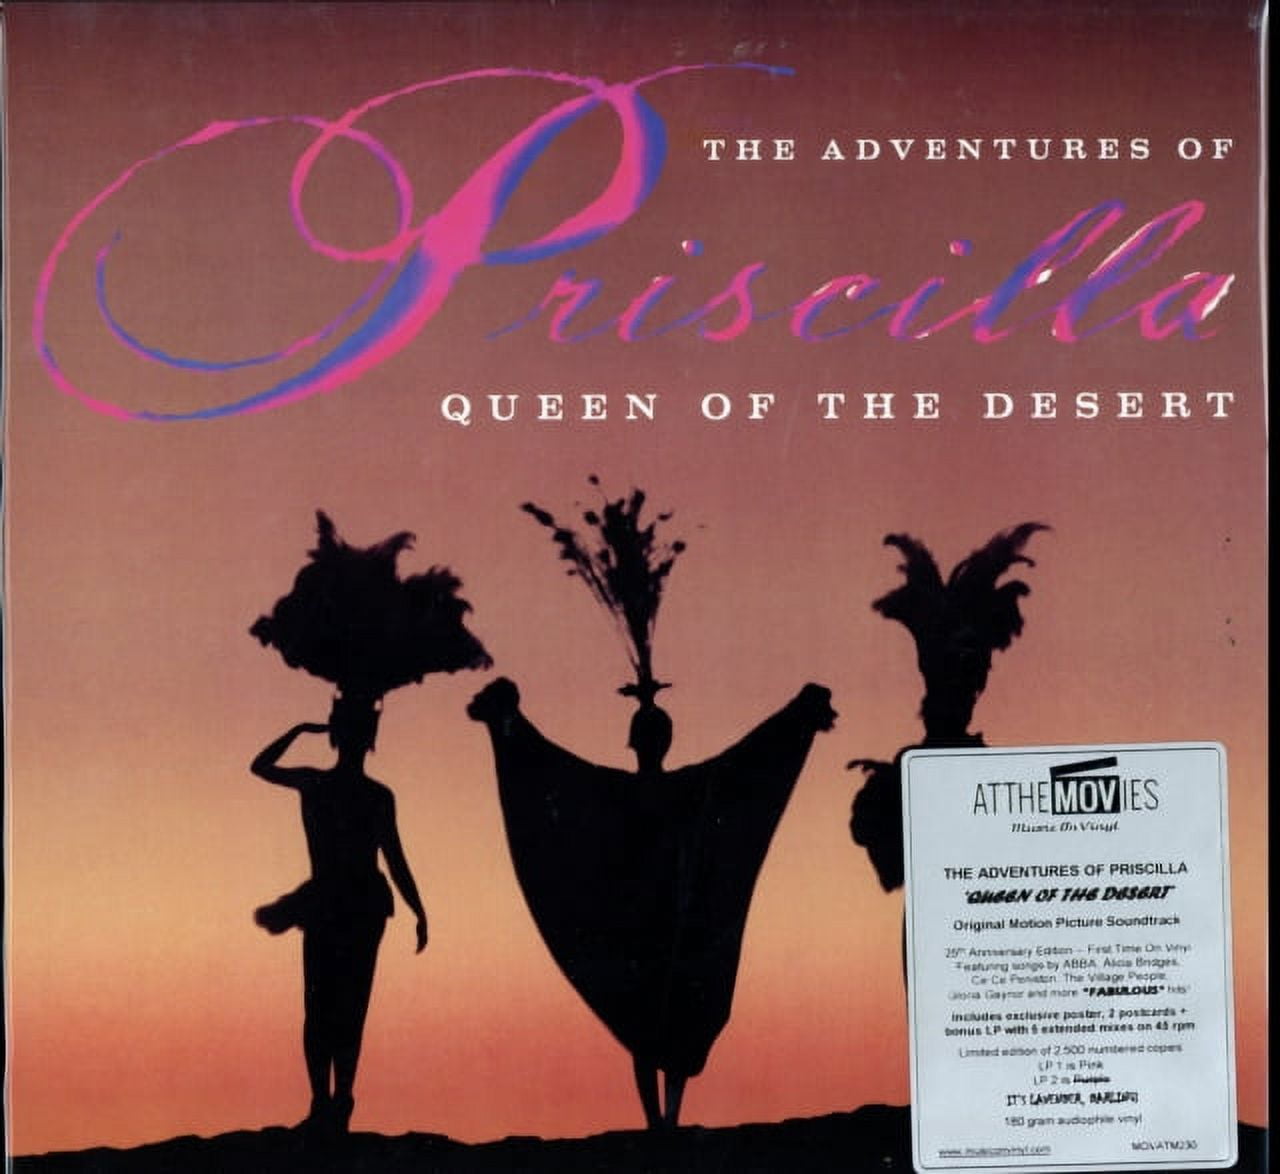 The Adventures of Priscilla – five things you didn't know about